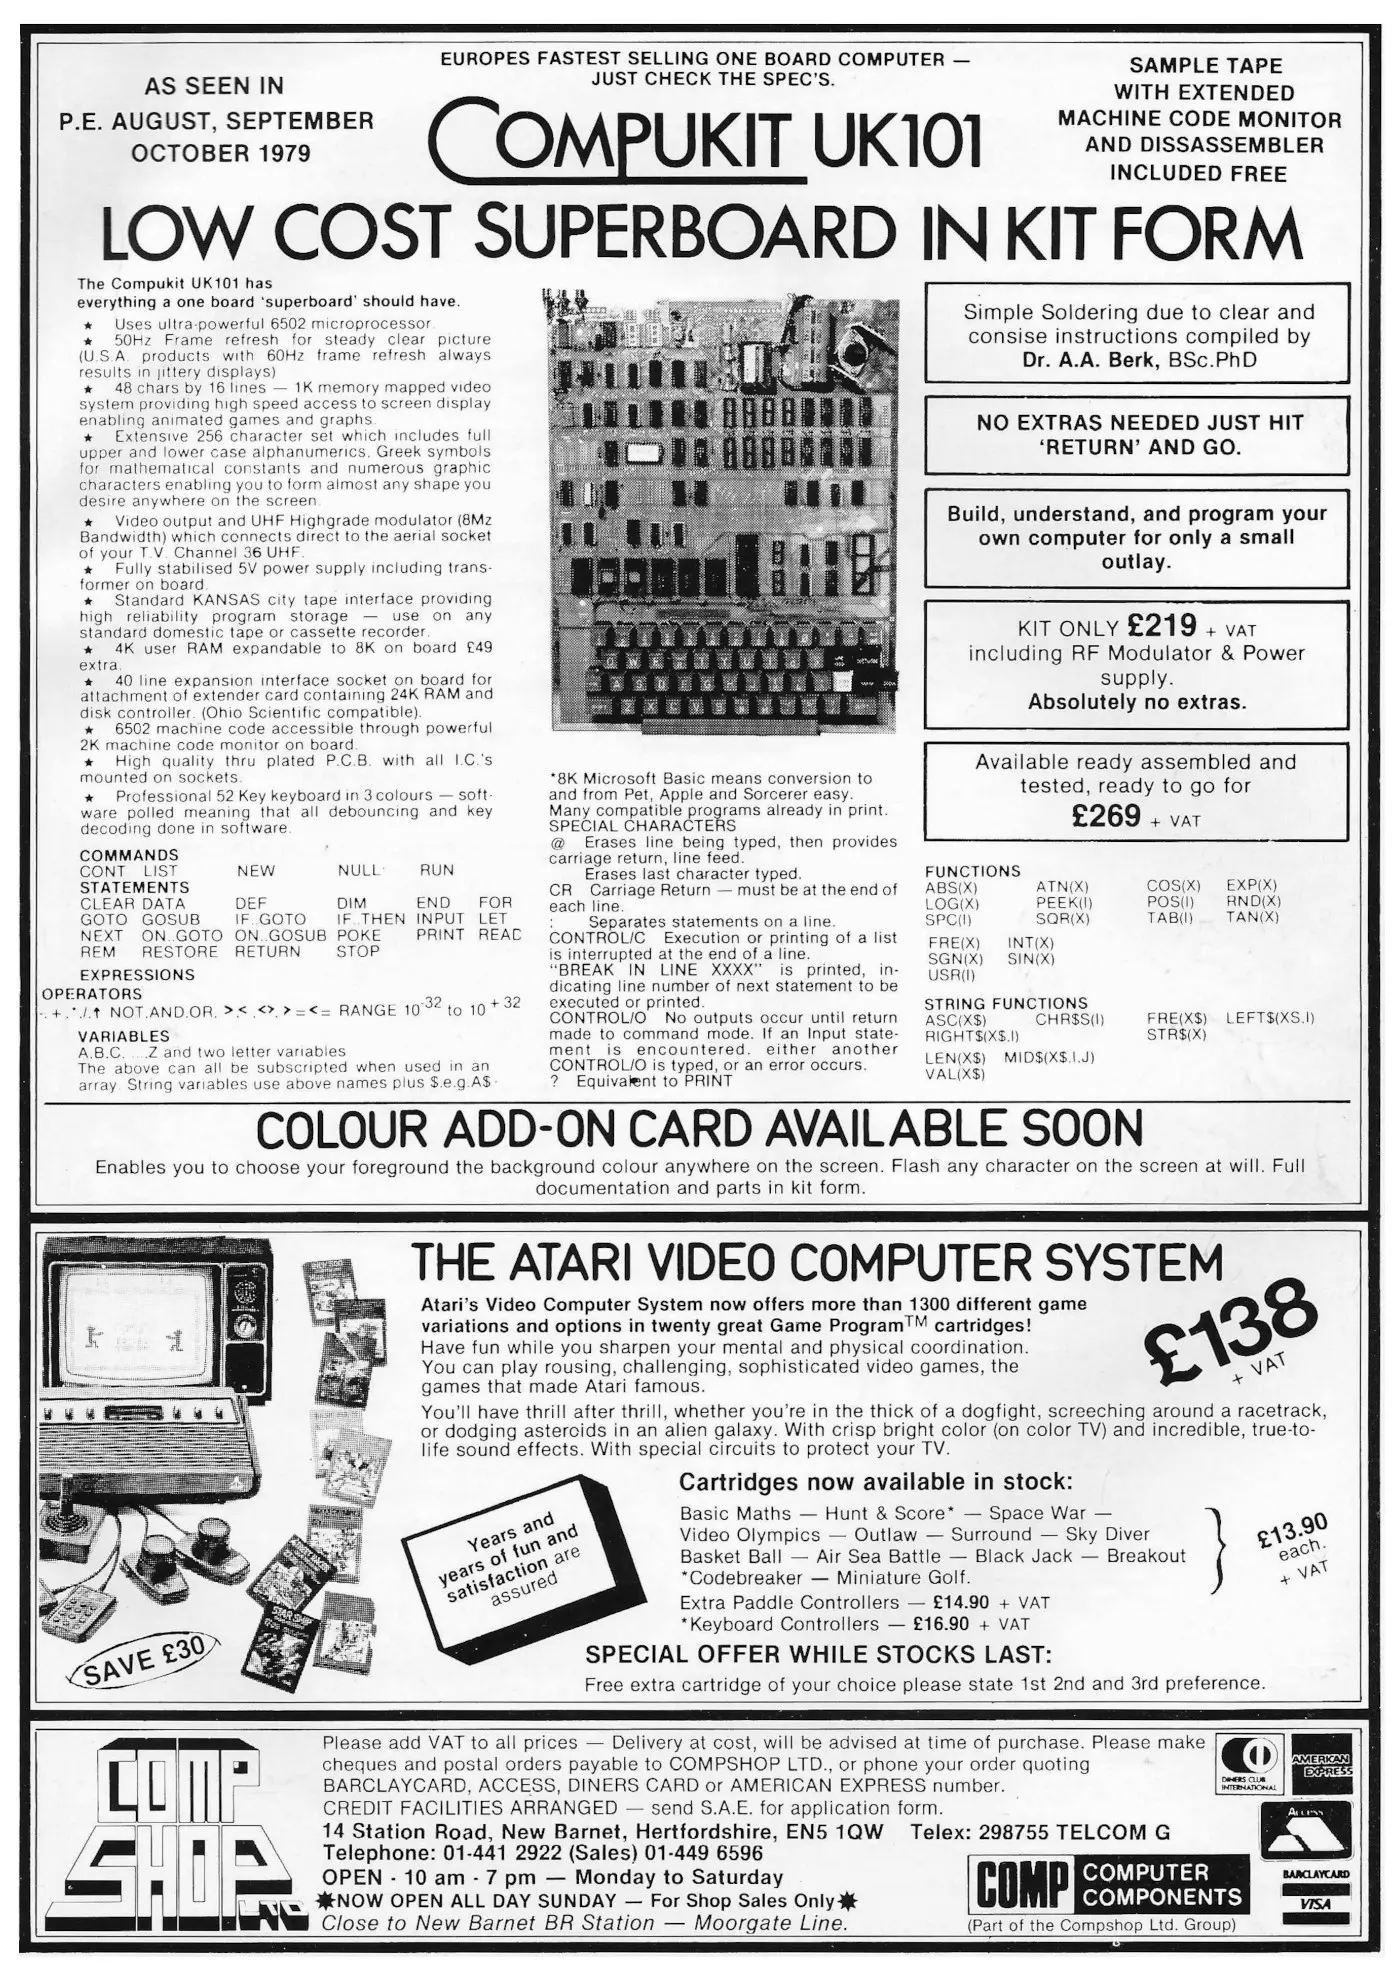 Compukit Advert: Compukit UK101 - Low-cost Superboard in kit form, from Personal Computer World, January 1980